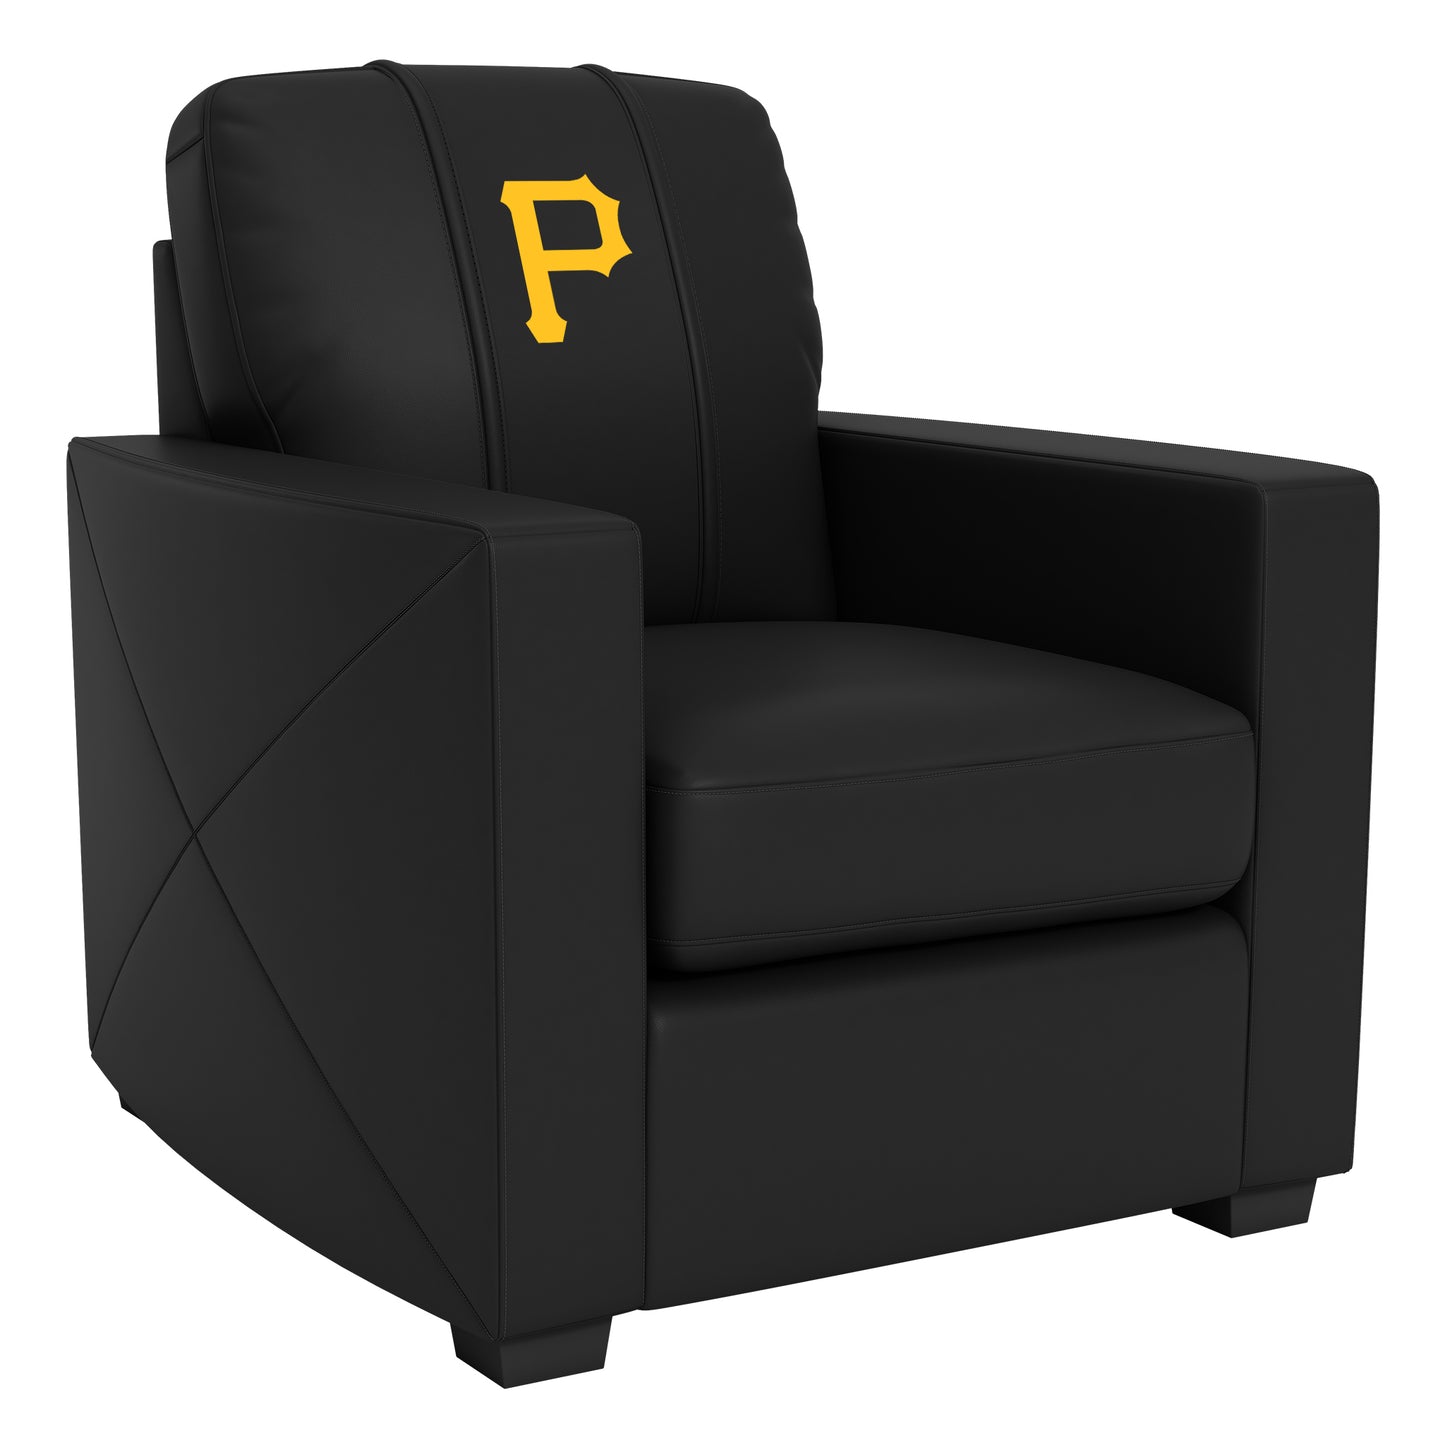 Silver Club Chair with Pittsburgh Pirates Secondary